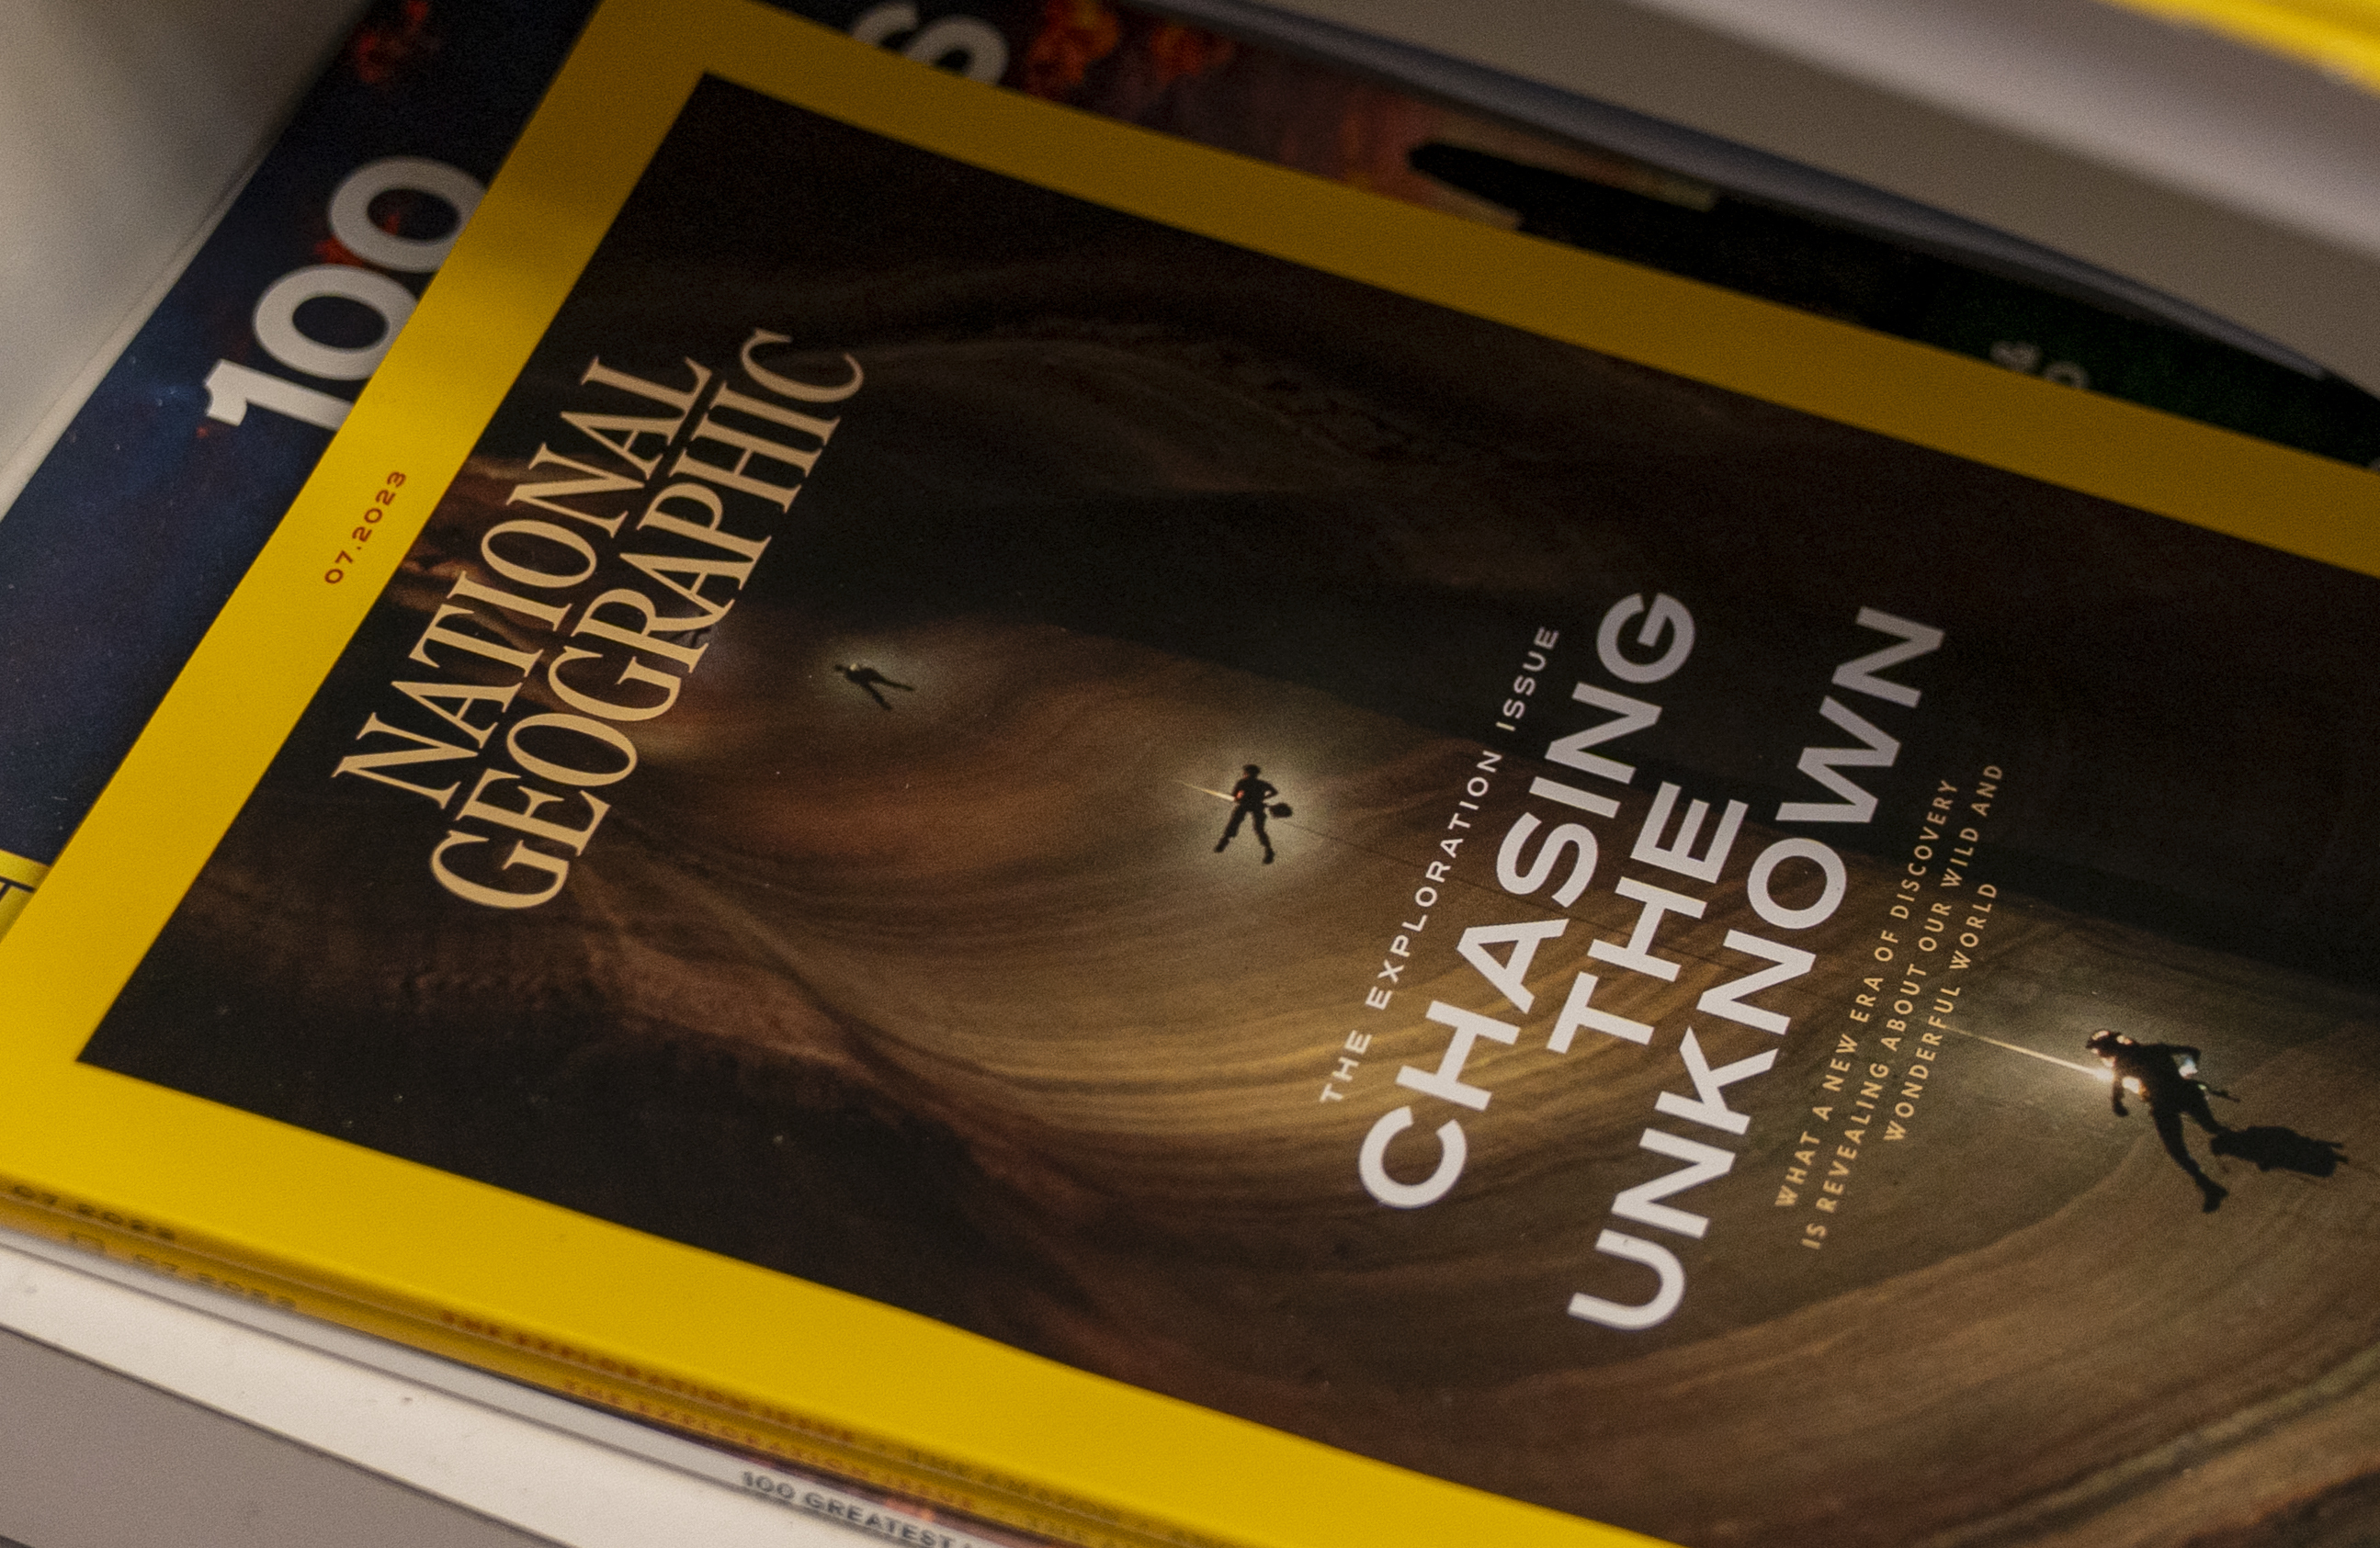 National Geographic will end newsstand sales of magazine next year